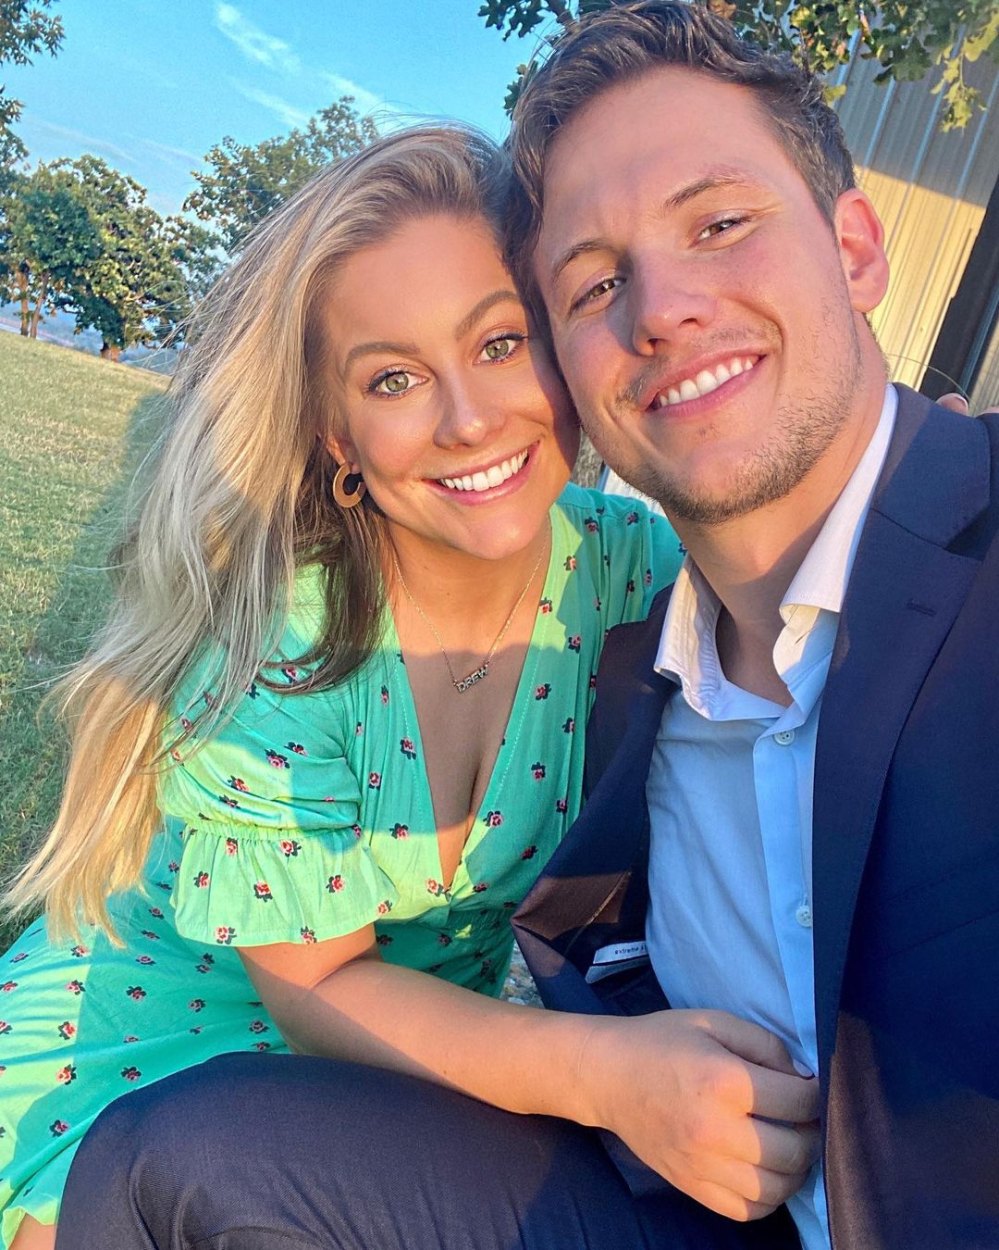 Pregnant Shawn Johnson East and Andrew East Are Already Thinking of Baby No. 3 2